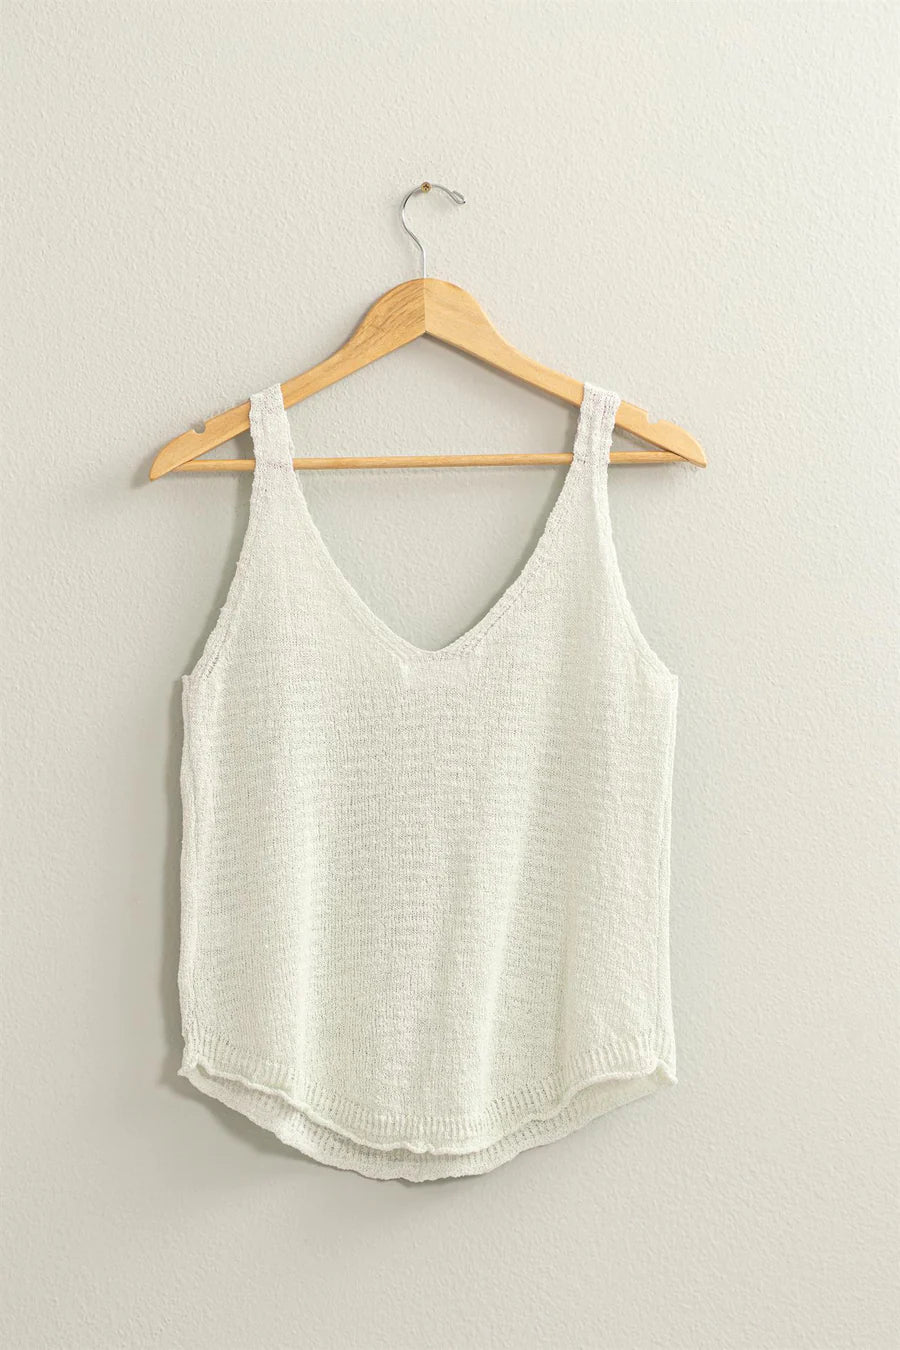 zoomed out view of white Terry Sleeveless Top with a V neck and shoulder straps, featuring a relaxed fit. Made from 75% cotton and 25% polyester, ideal for pairing with shorts, pants, or skirts